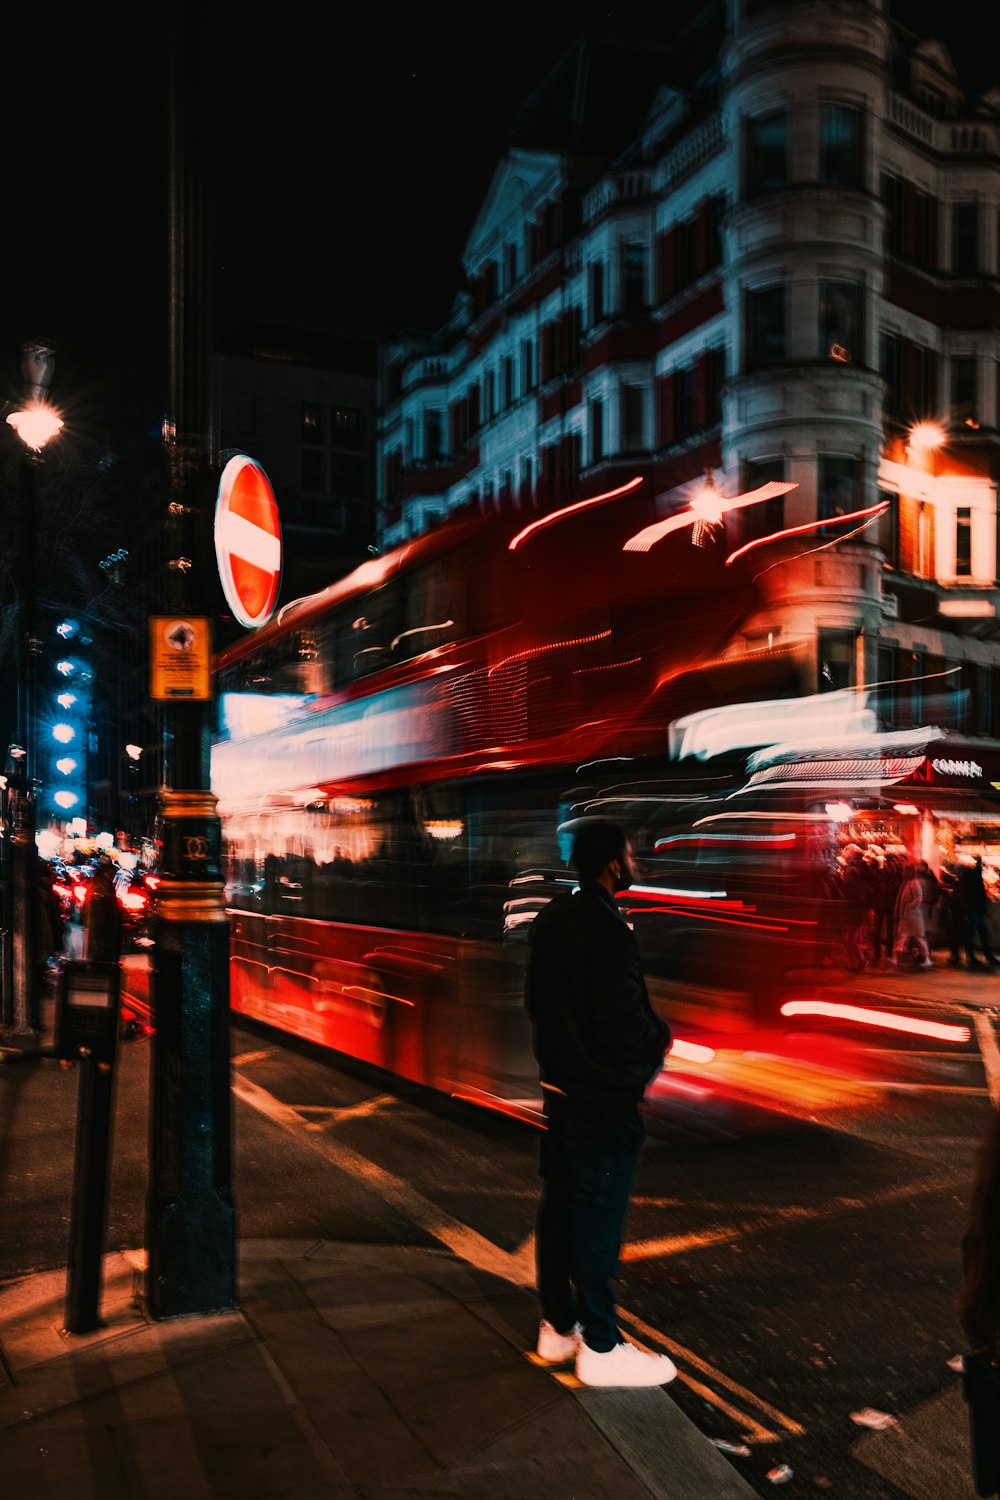 a man standing on the side of a street next to a red double decker bus